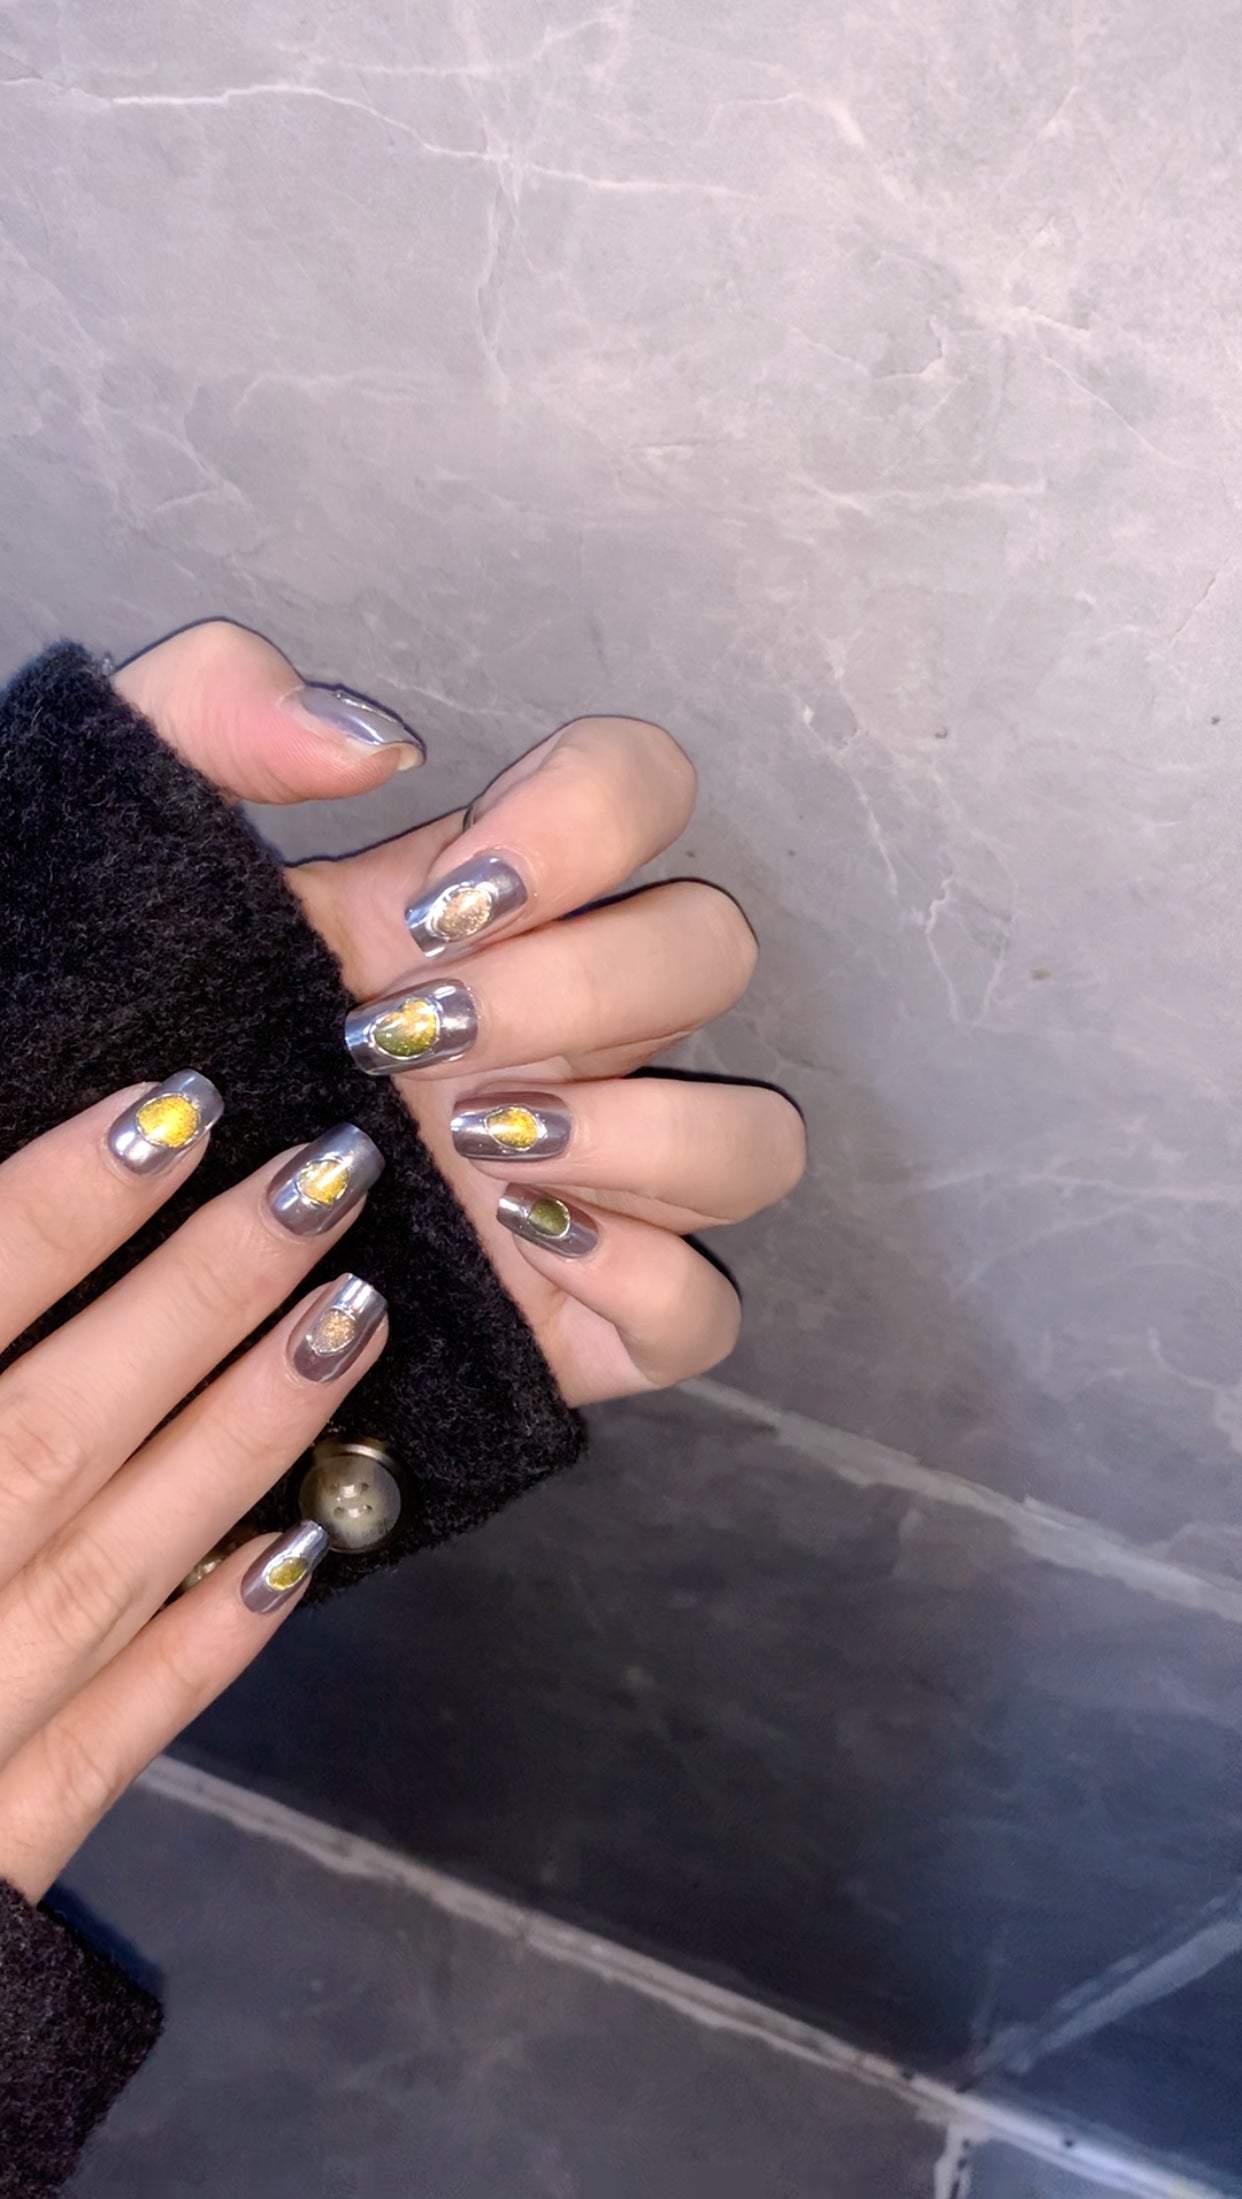 Silver Based/ Colorful Nails/ Daily Wear